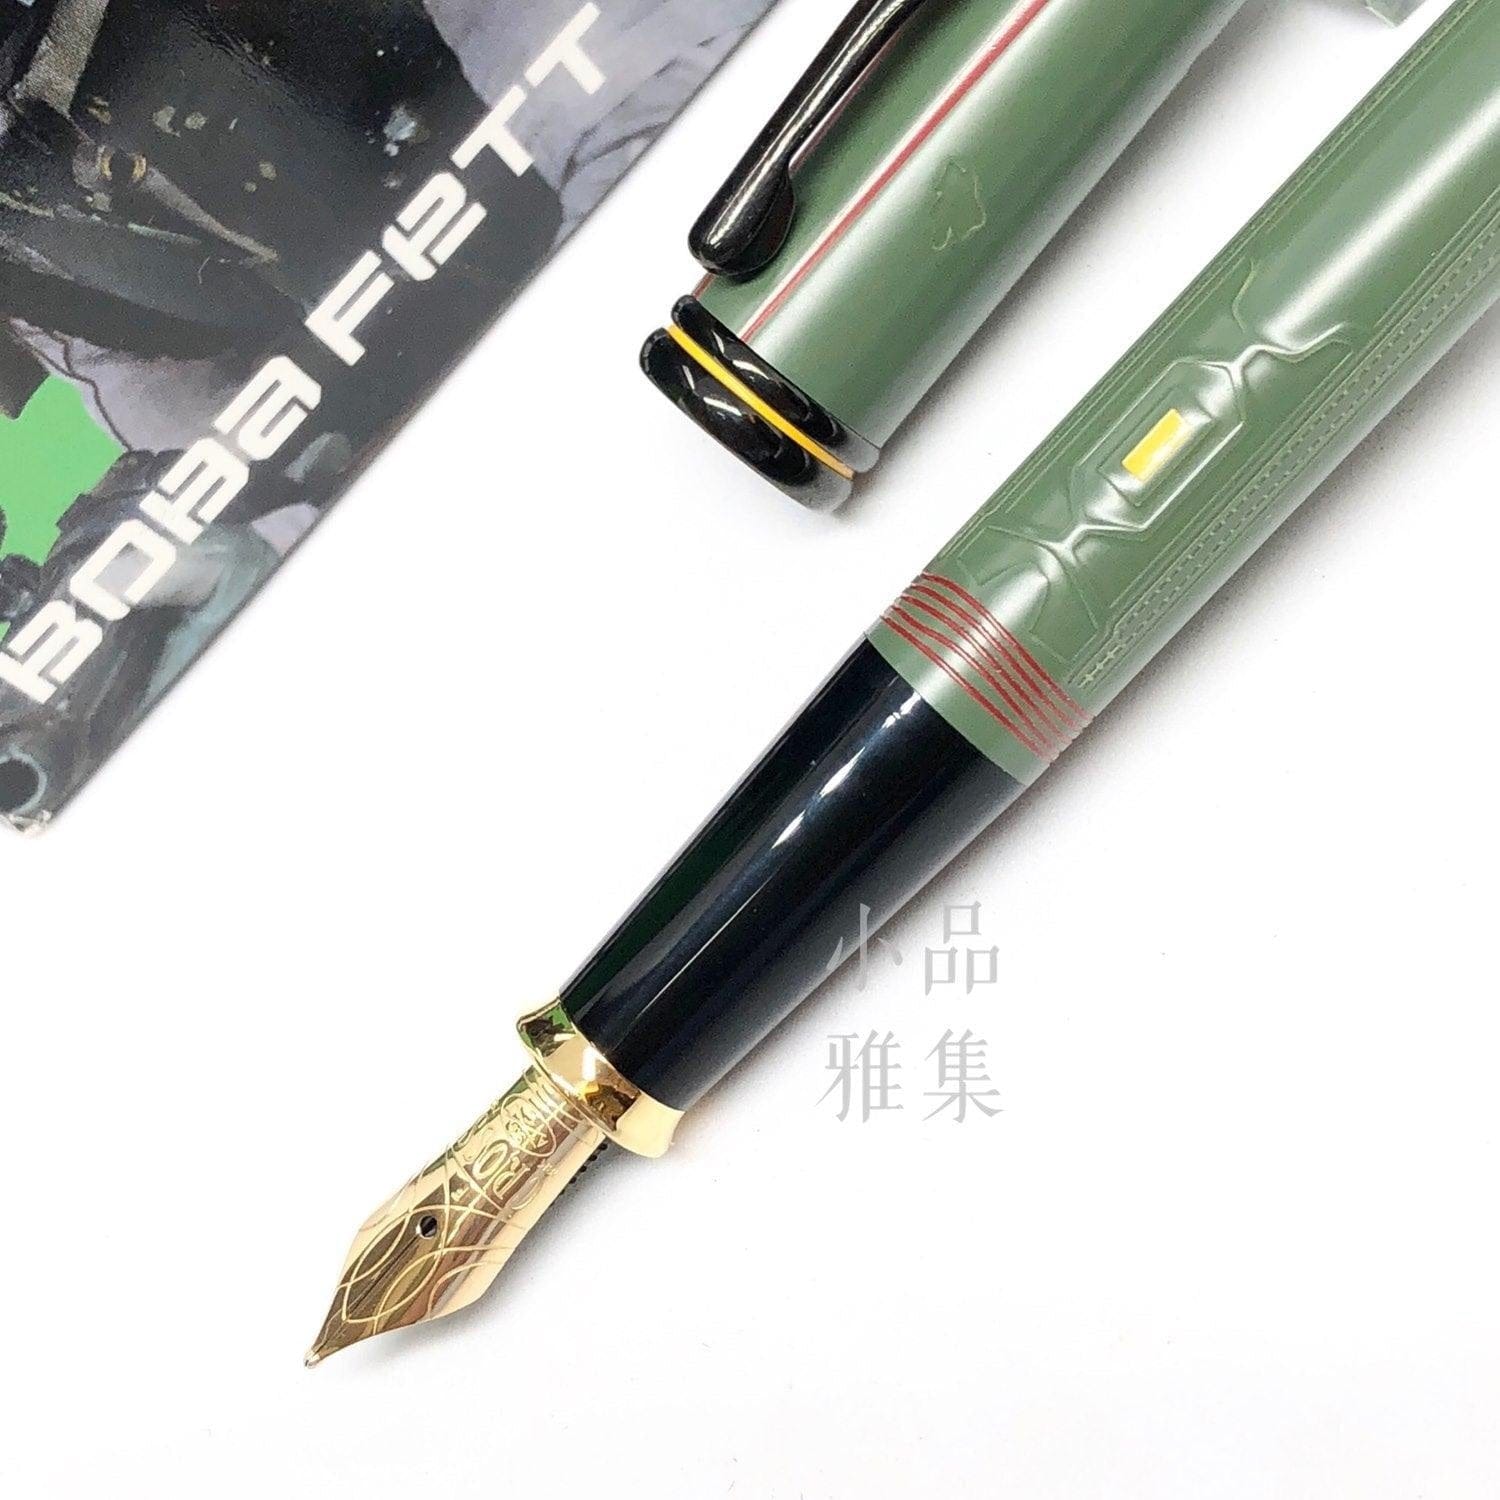 CROSS TOWNSEND STAR WARS 18K limited edition Fountain Pen ( BOBA